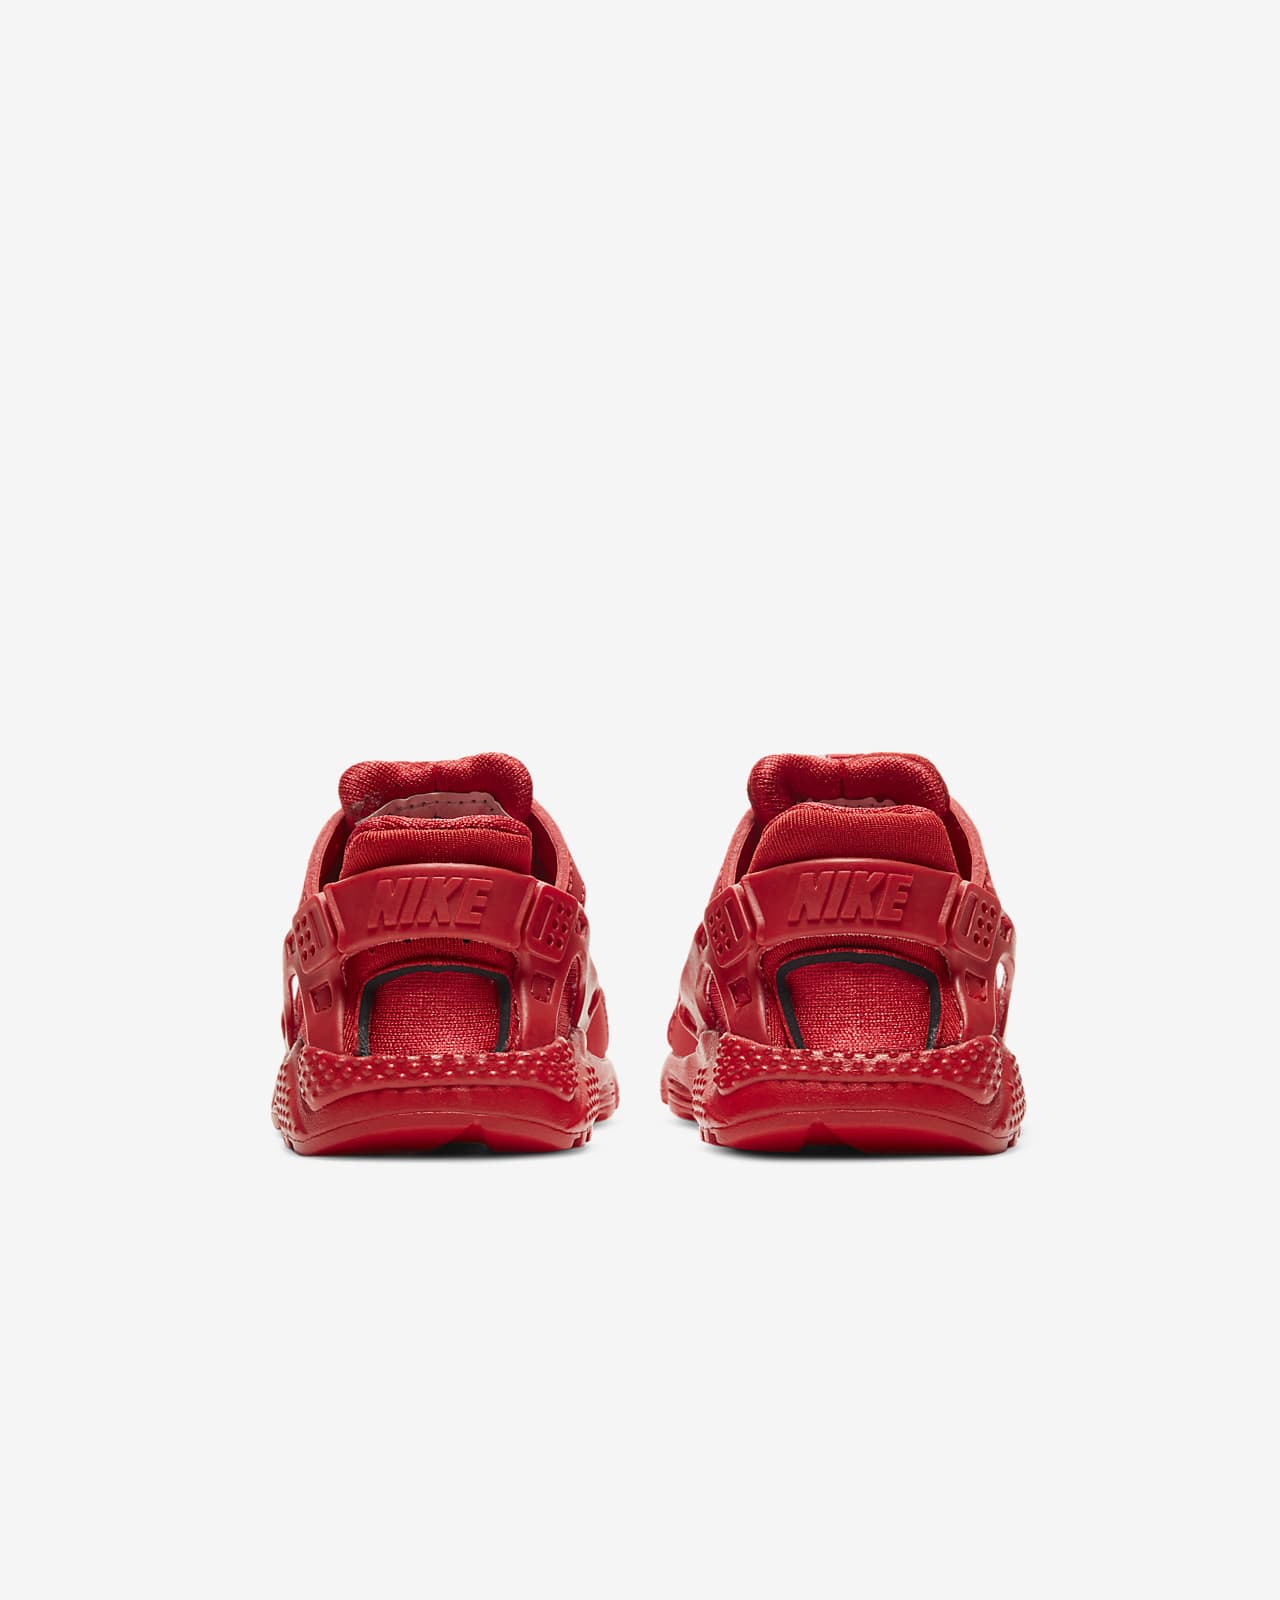 all red huaraches toddler